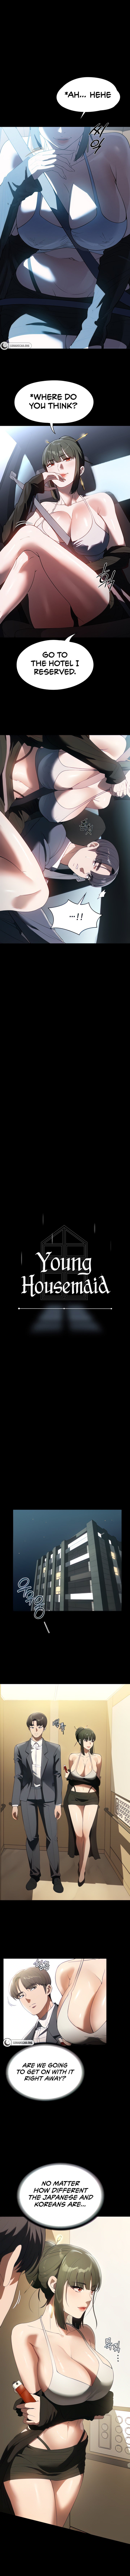 young-housemaid-chap-46-0